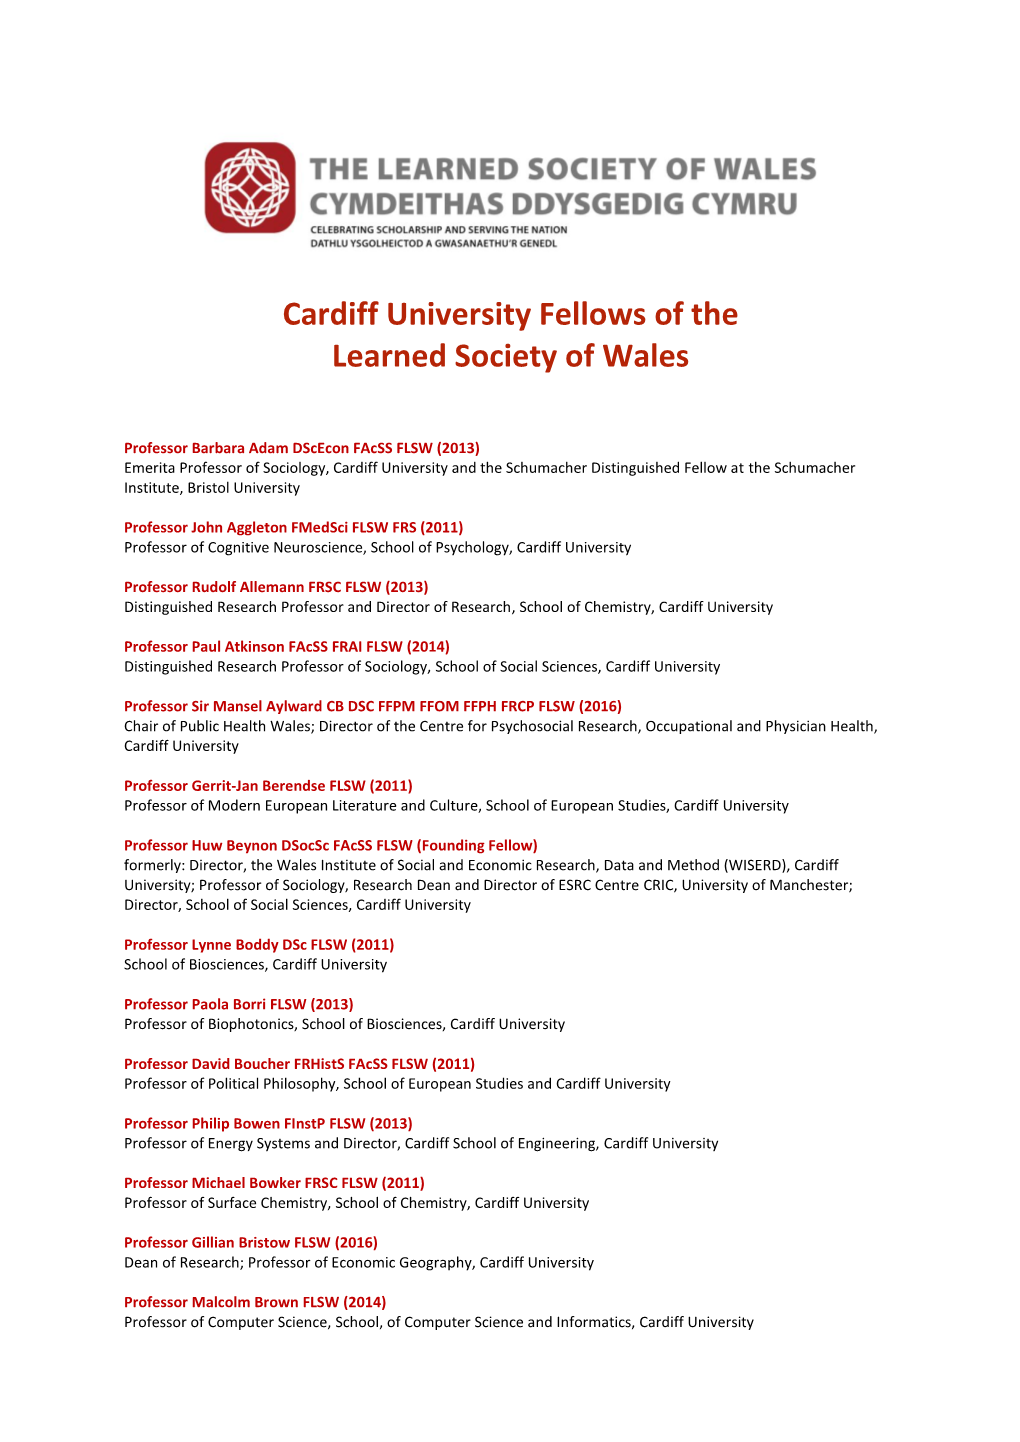 Cardiff University Fellows of the Learned Society of Wales